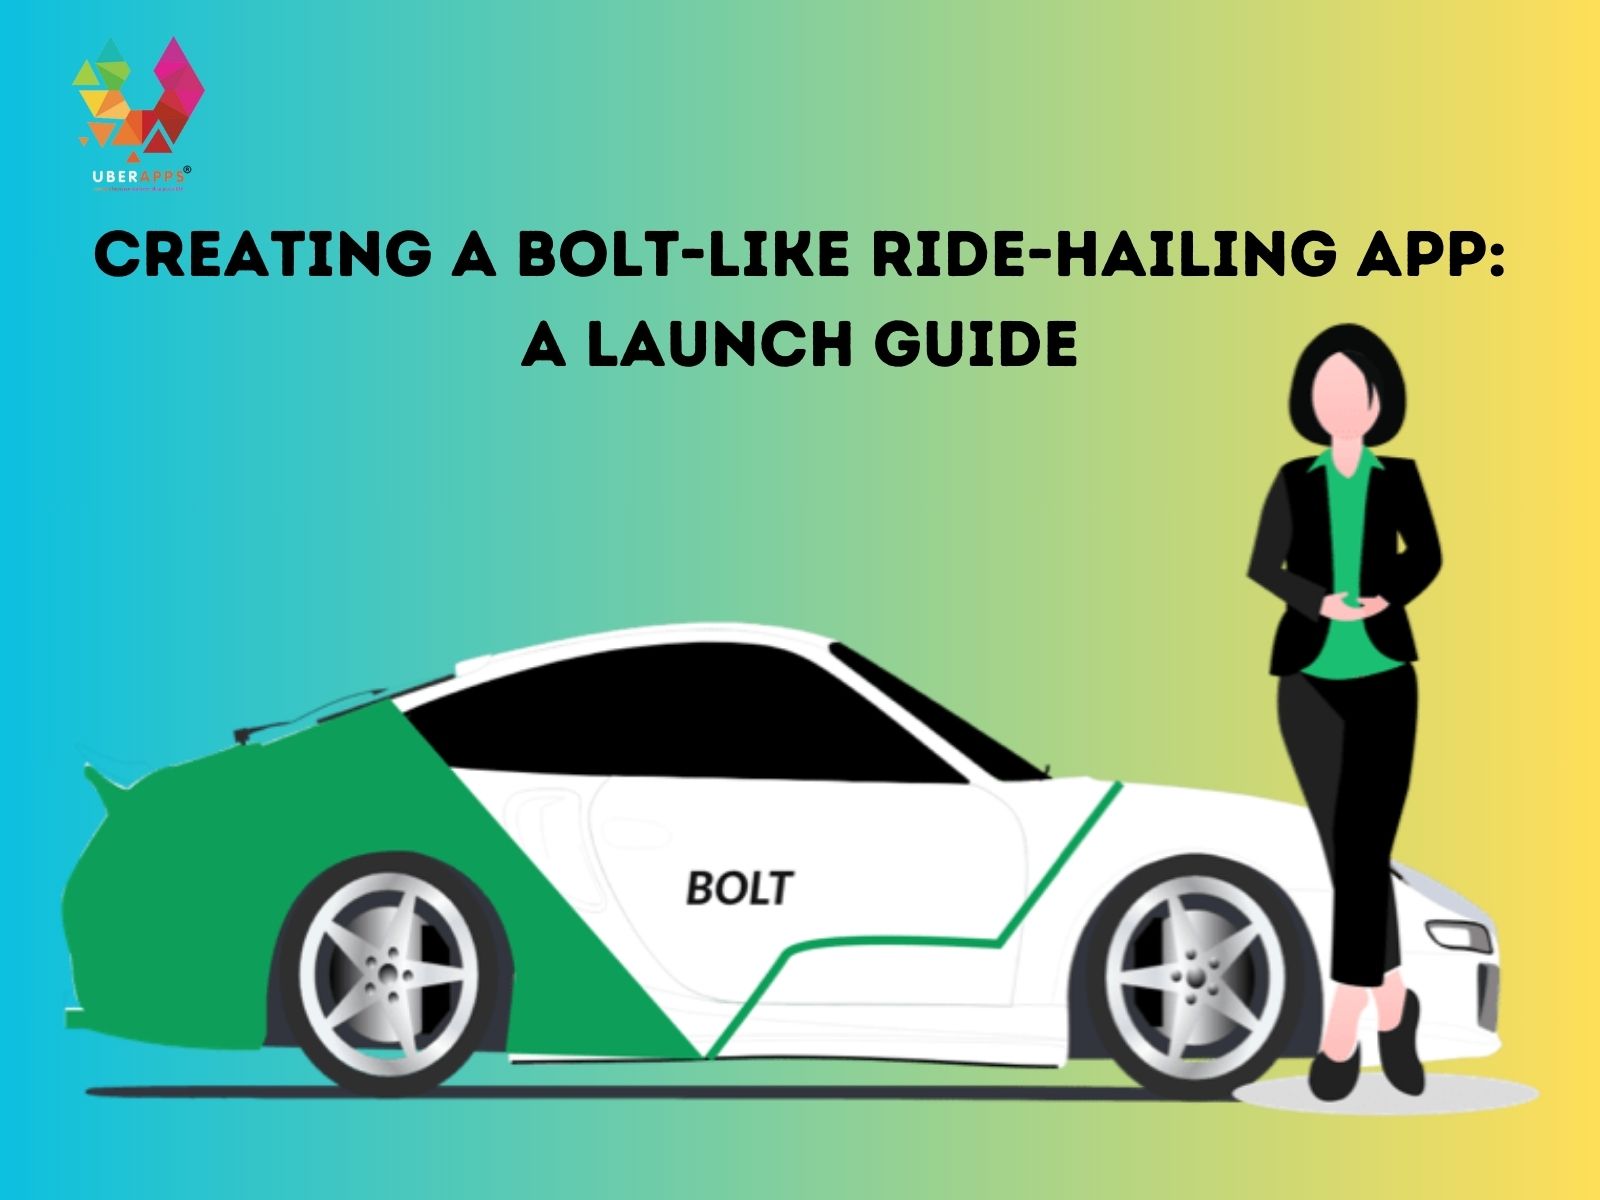 Creating a Bolt-Like Ride-Hailing App: a Launch Guide